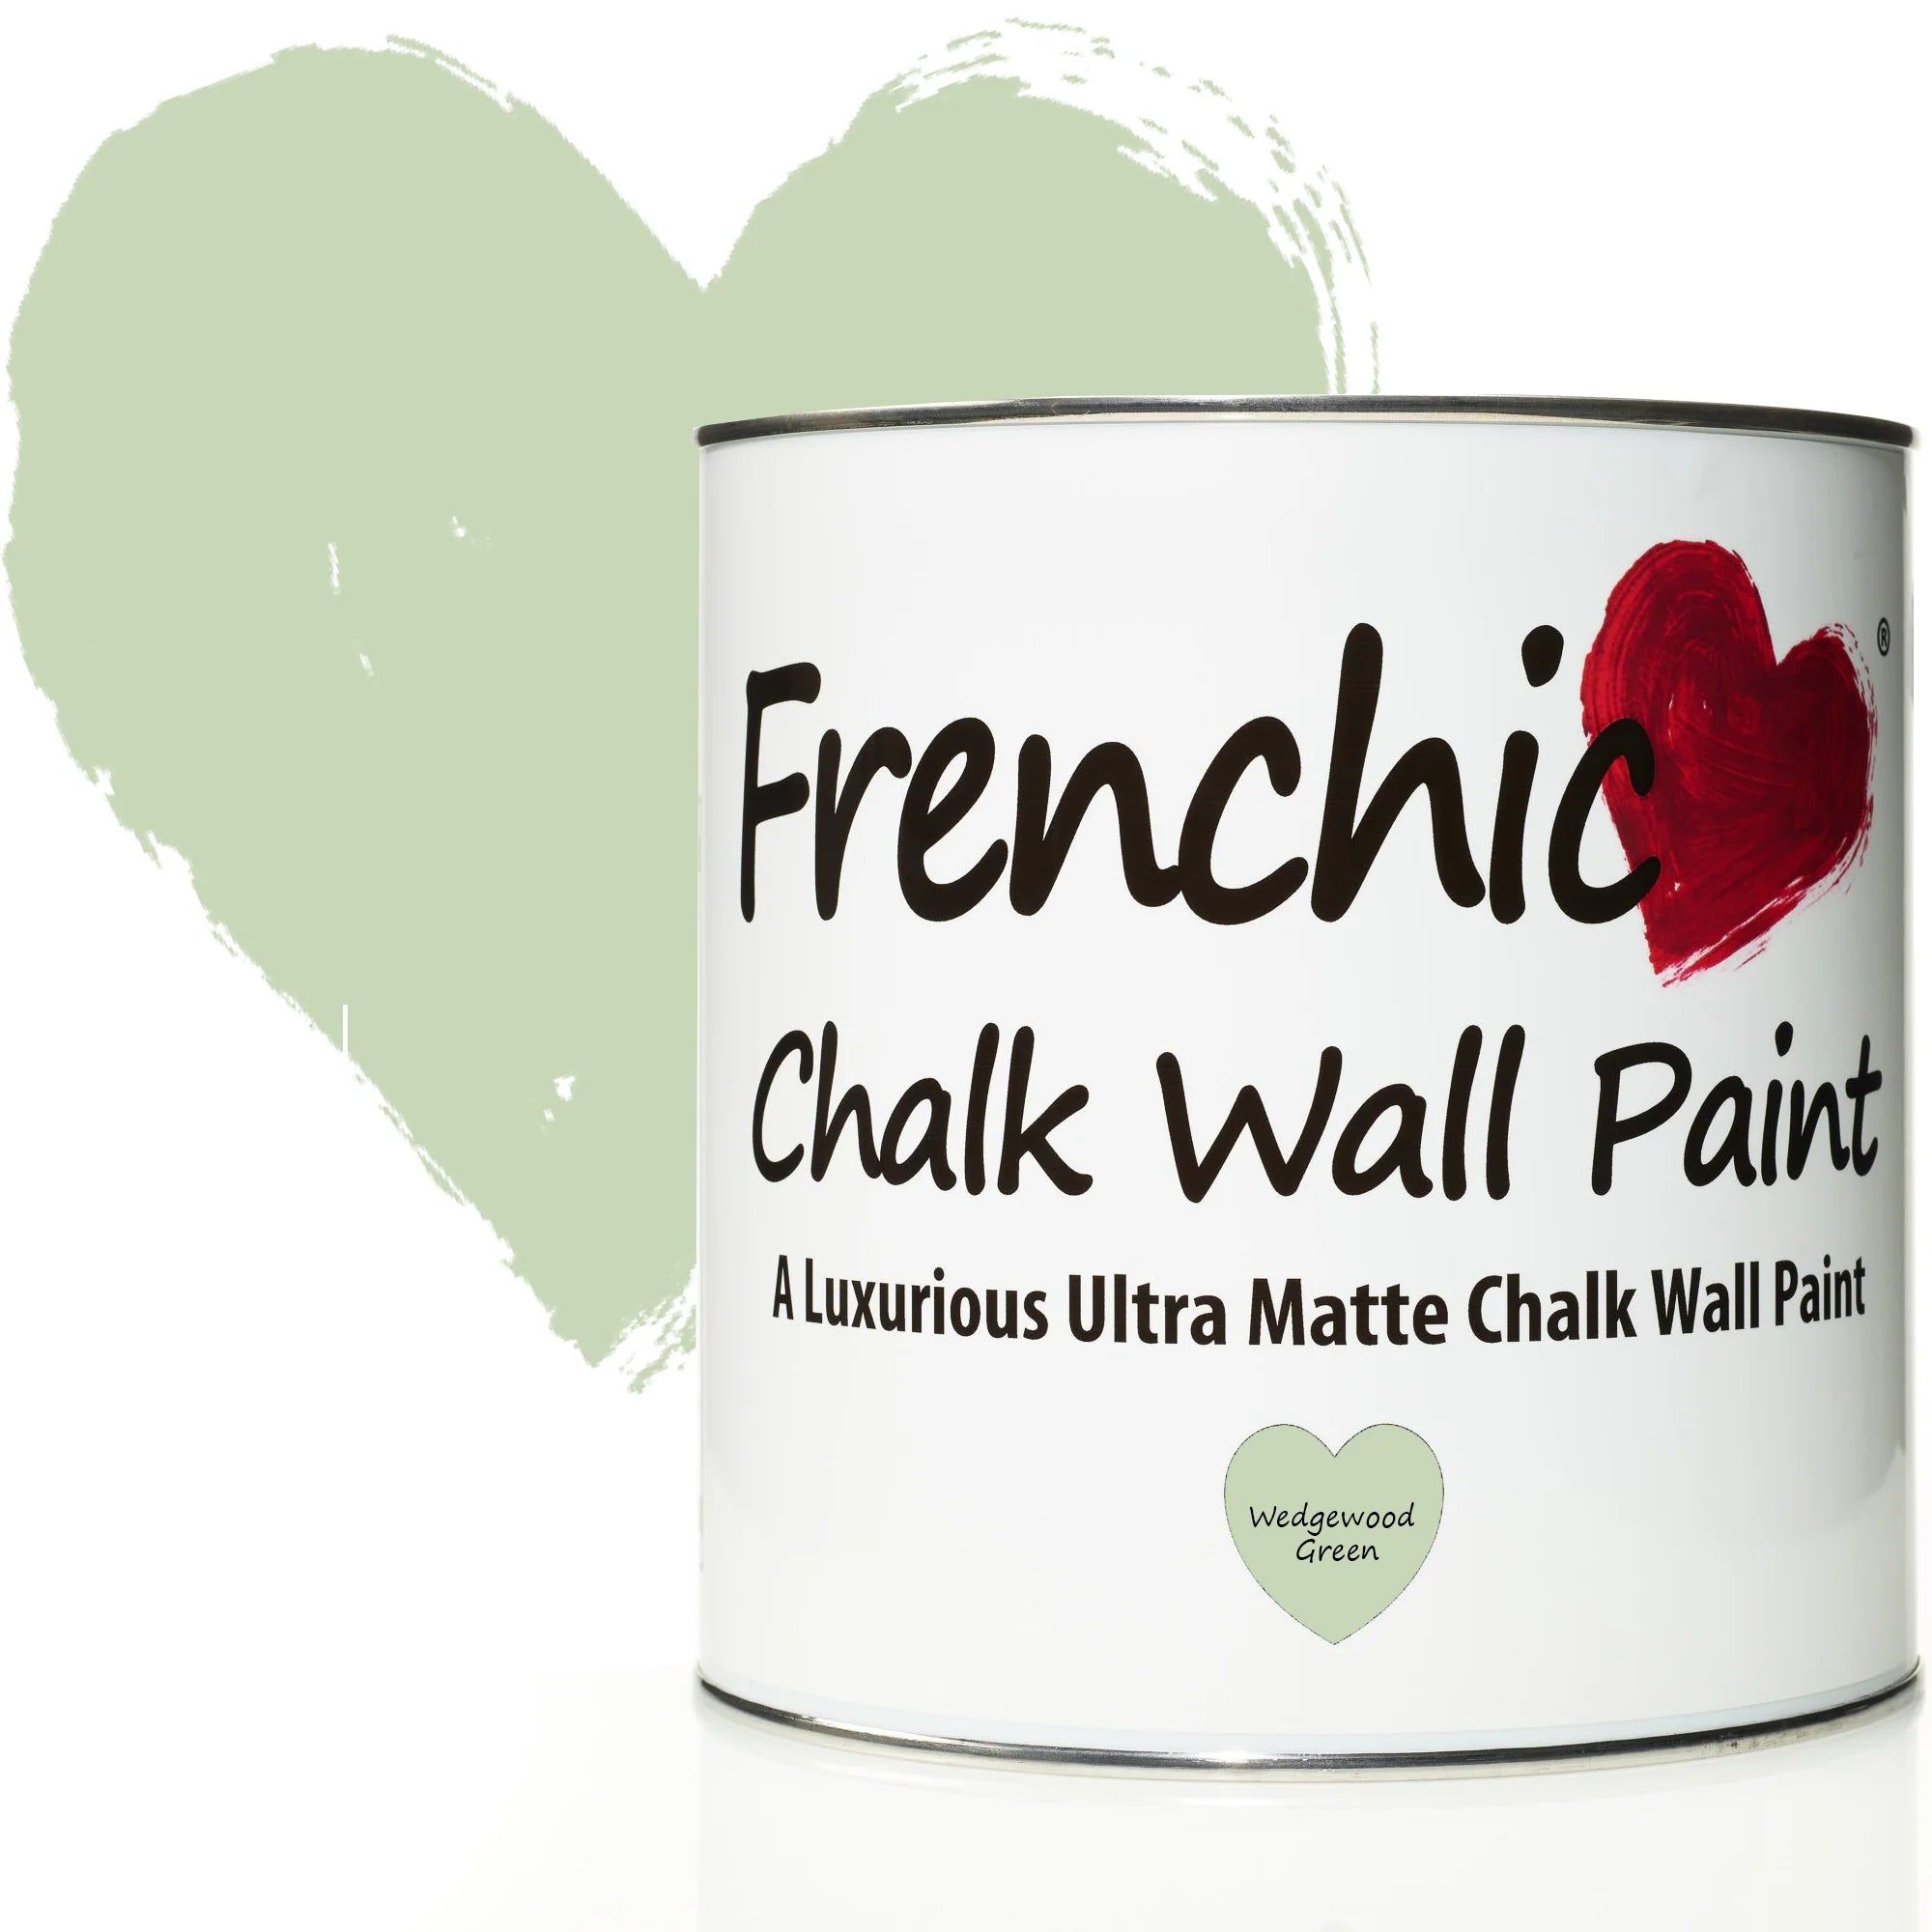 Frenchic Paint Wedgewood Green Wall Paint 2.5L Frenchic Paint Chalk Wall Paint Range by Weirs of Baggot Street Irelands Largest and most Trusted Stockist of Frenchic Paint. Shop online for Nationwide and Same Day Dublin Delivery